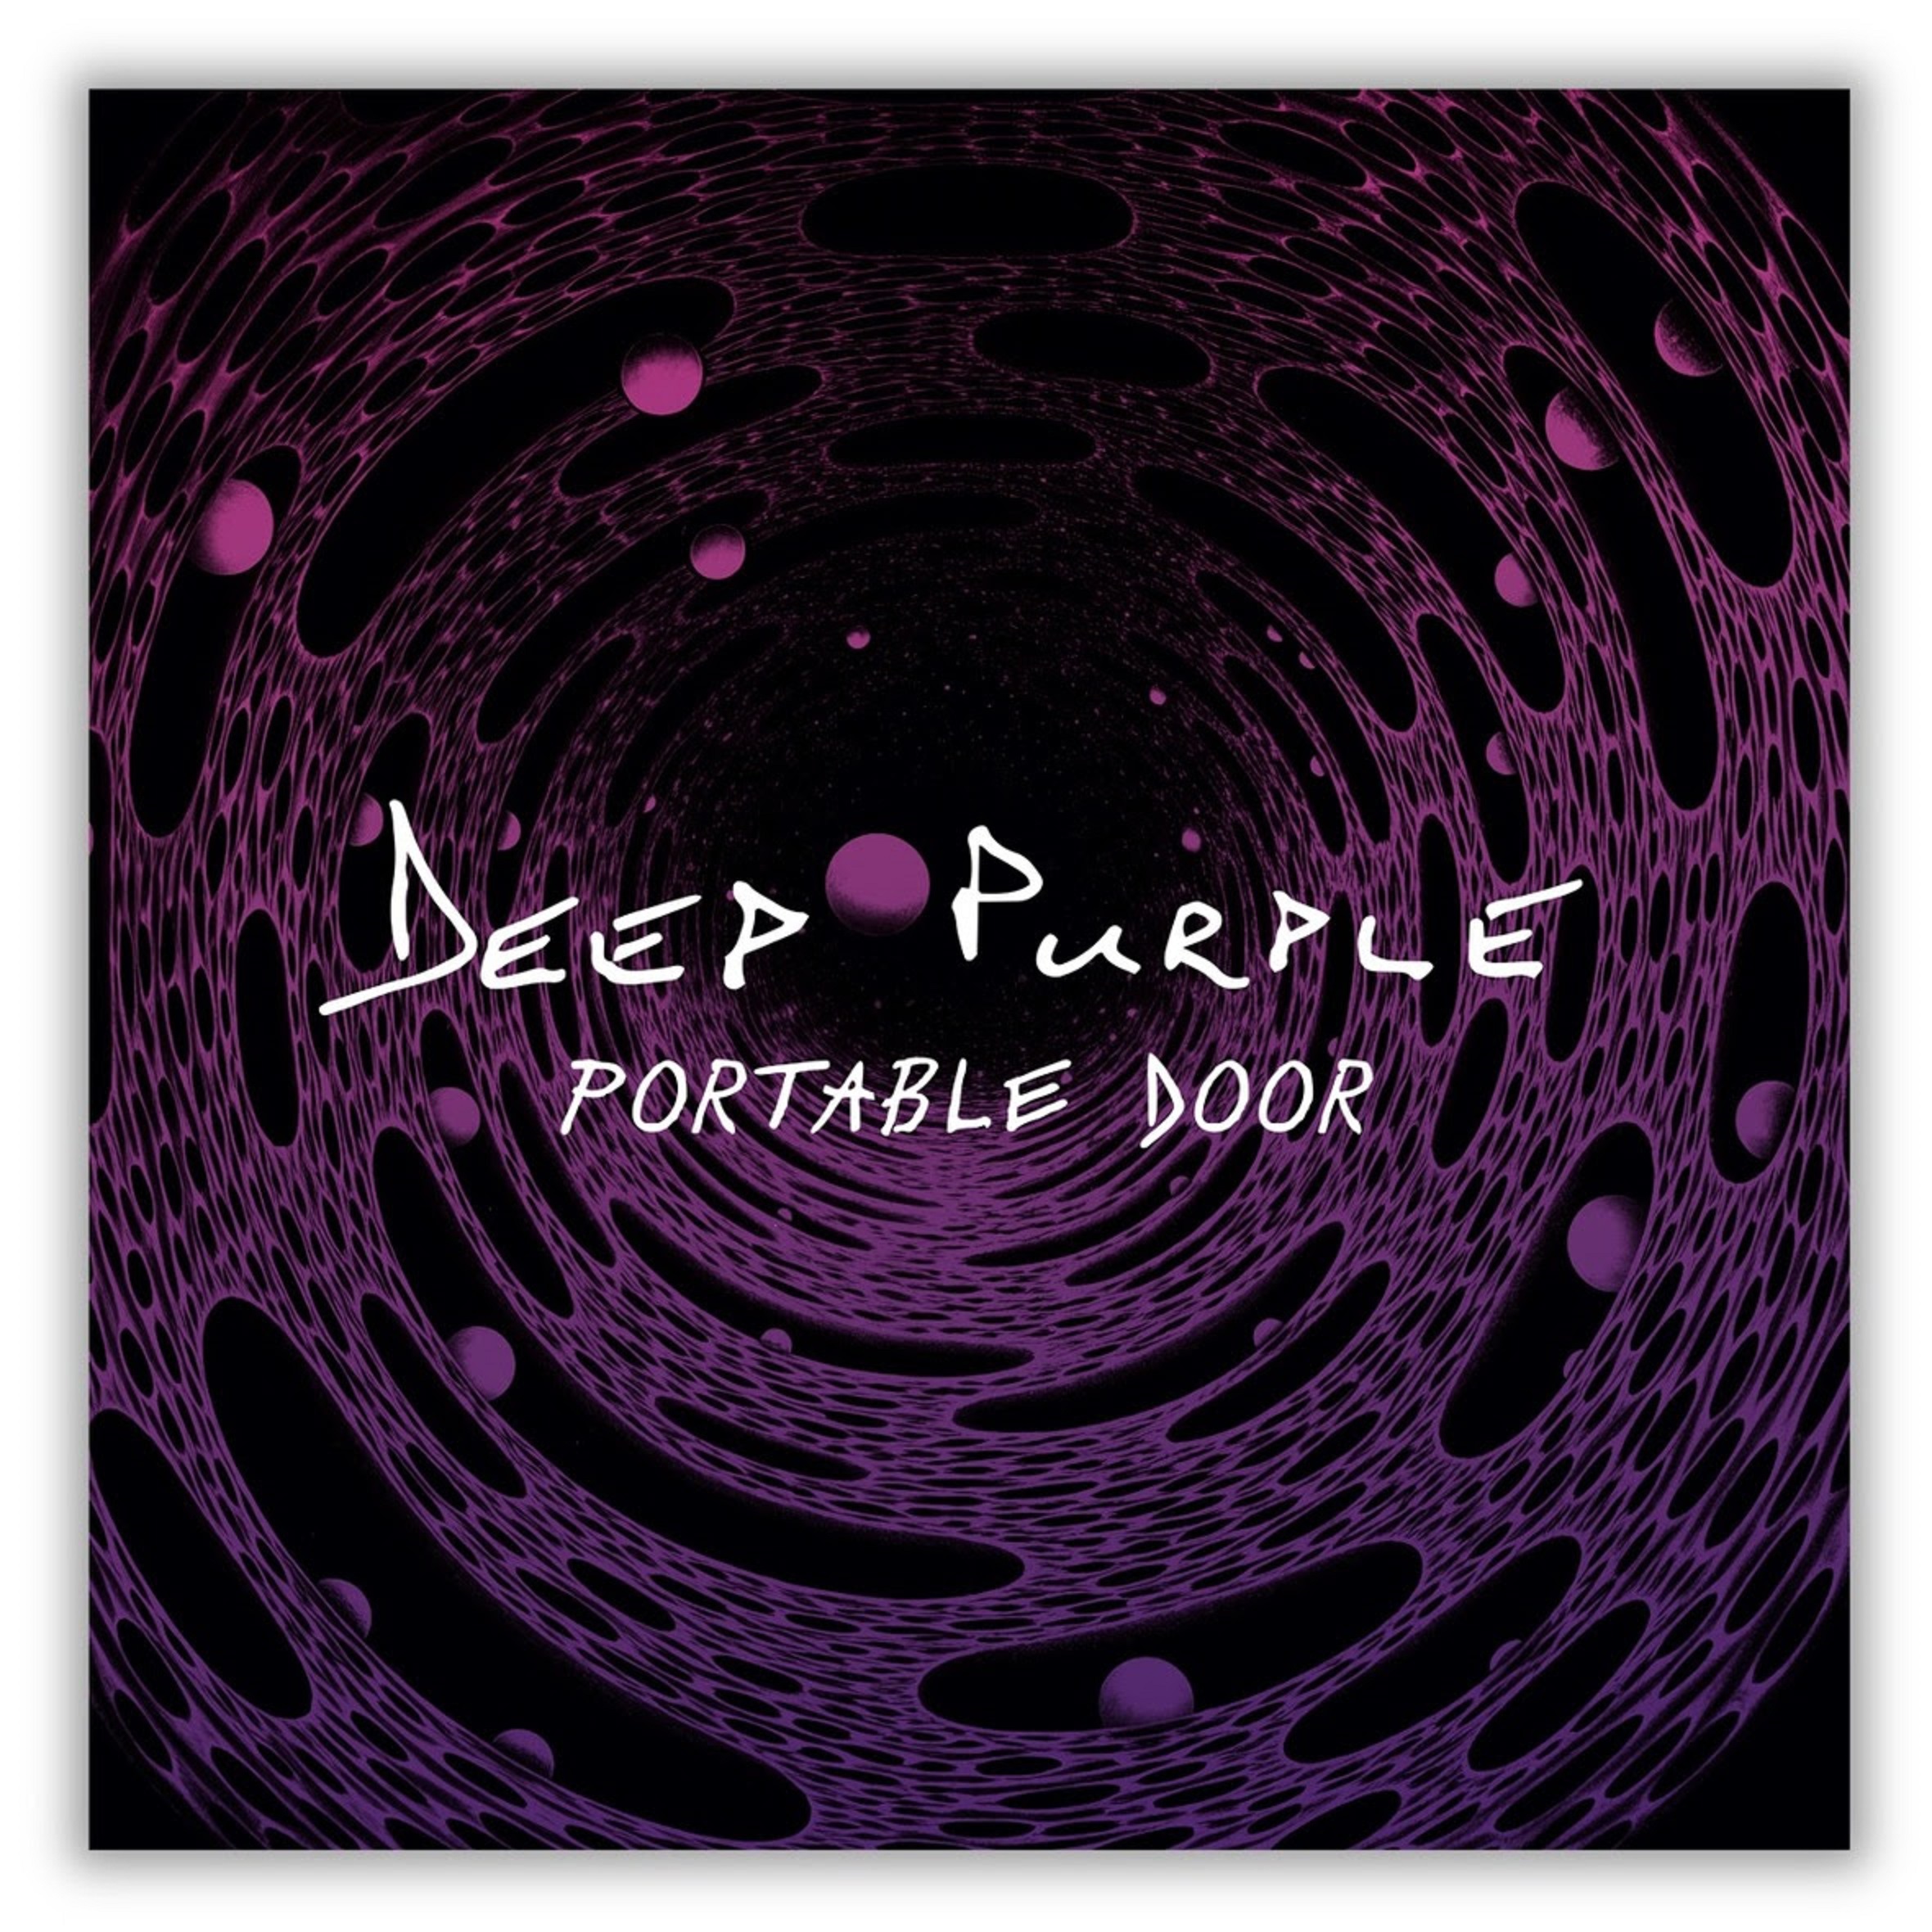 DEEP PURPLE RELEASES 'PORTABLE DOOR' FIRST SONG AND VIDEO FROM UPCOMING NEW ALBUM "=1"